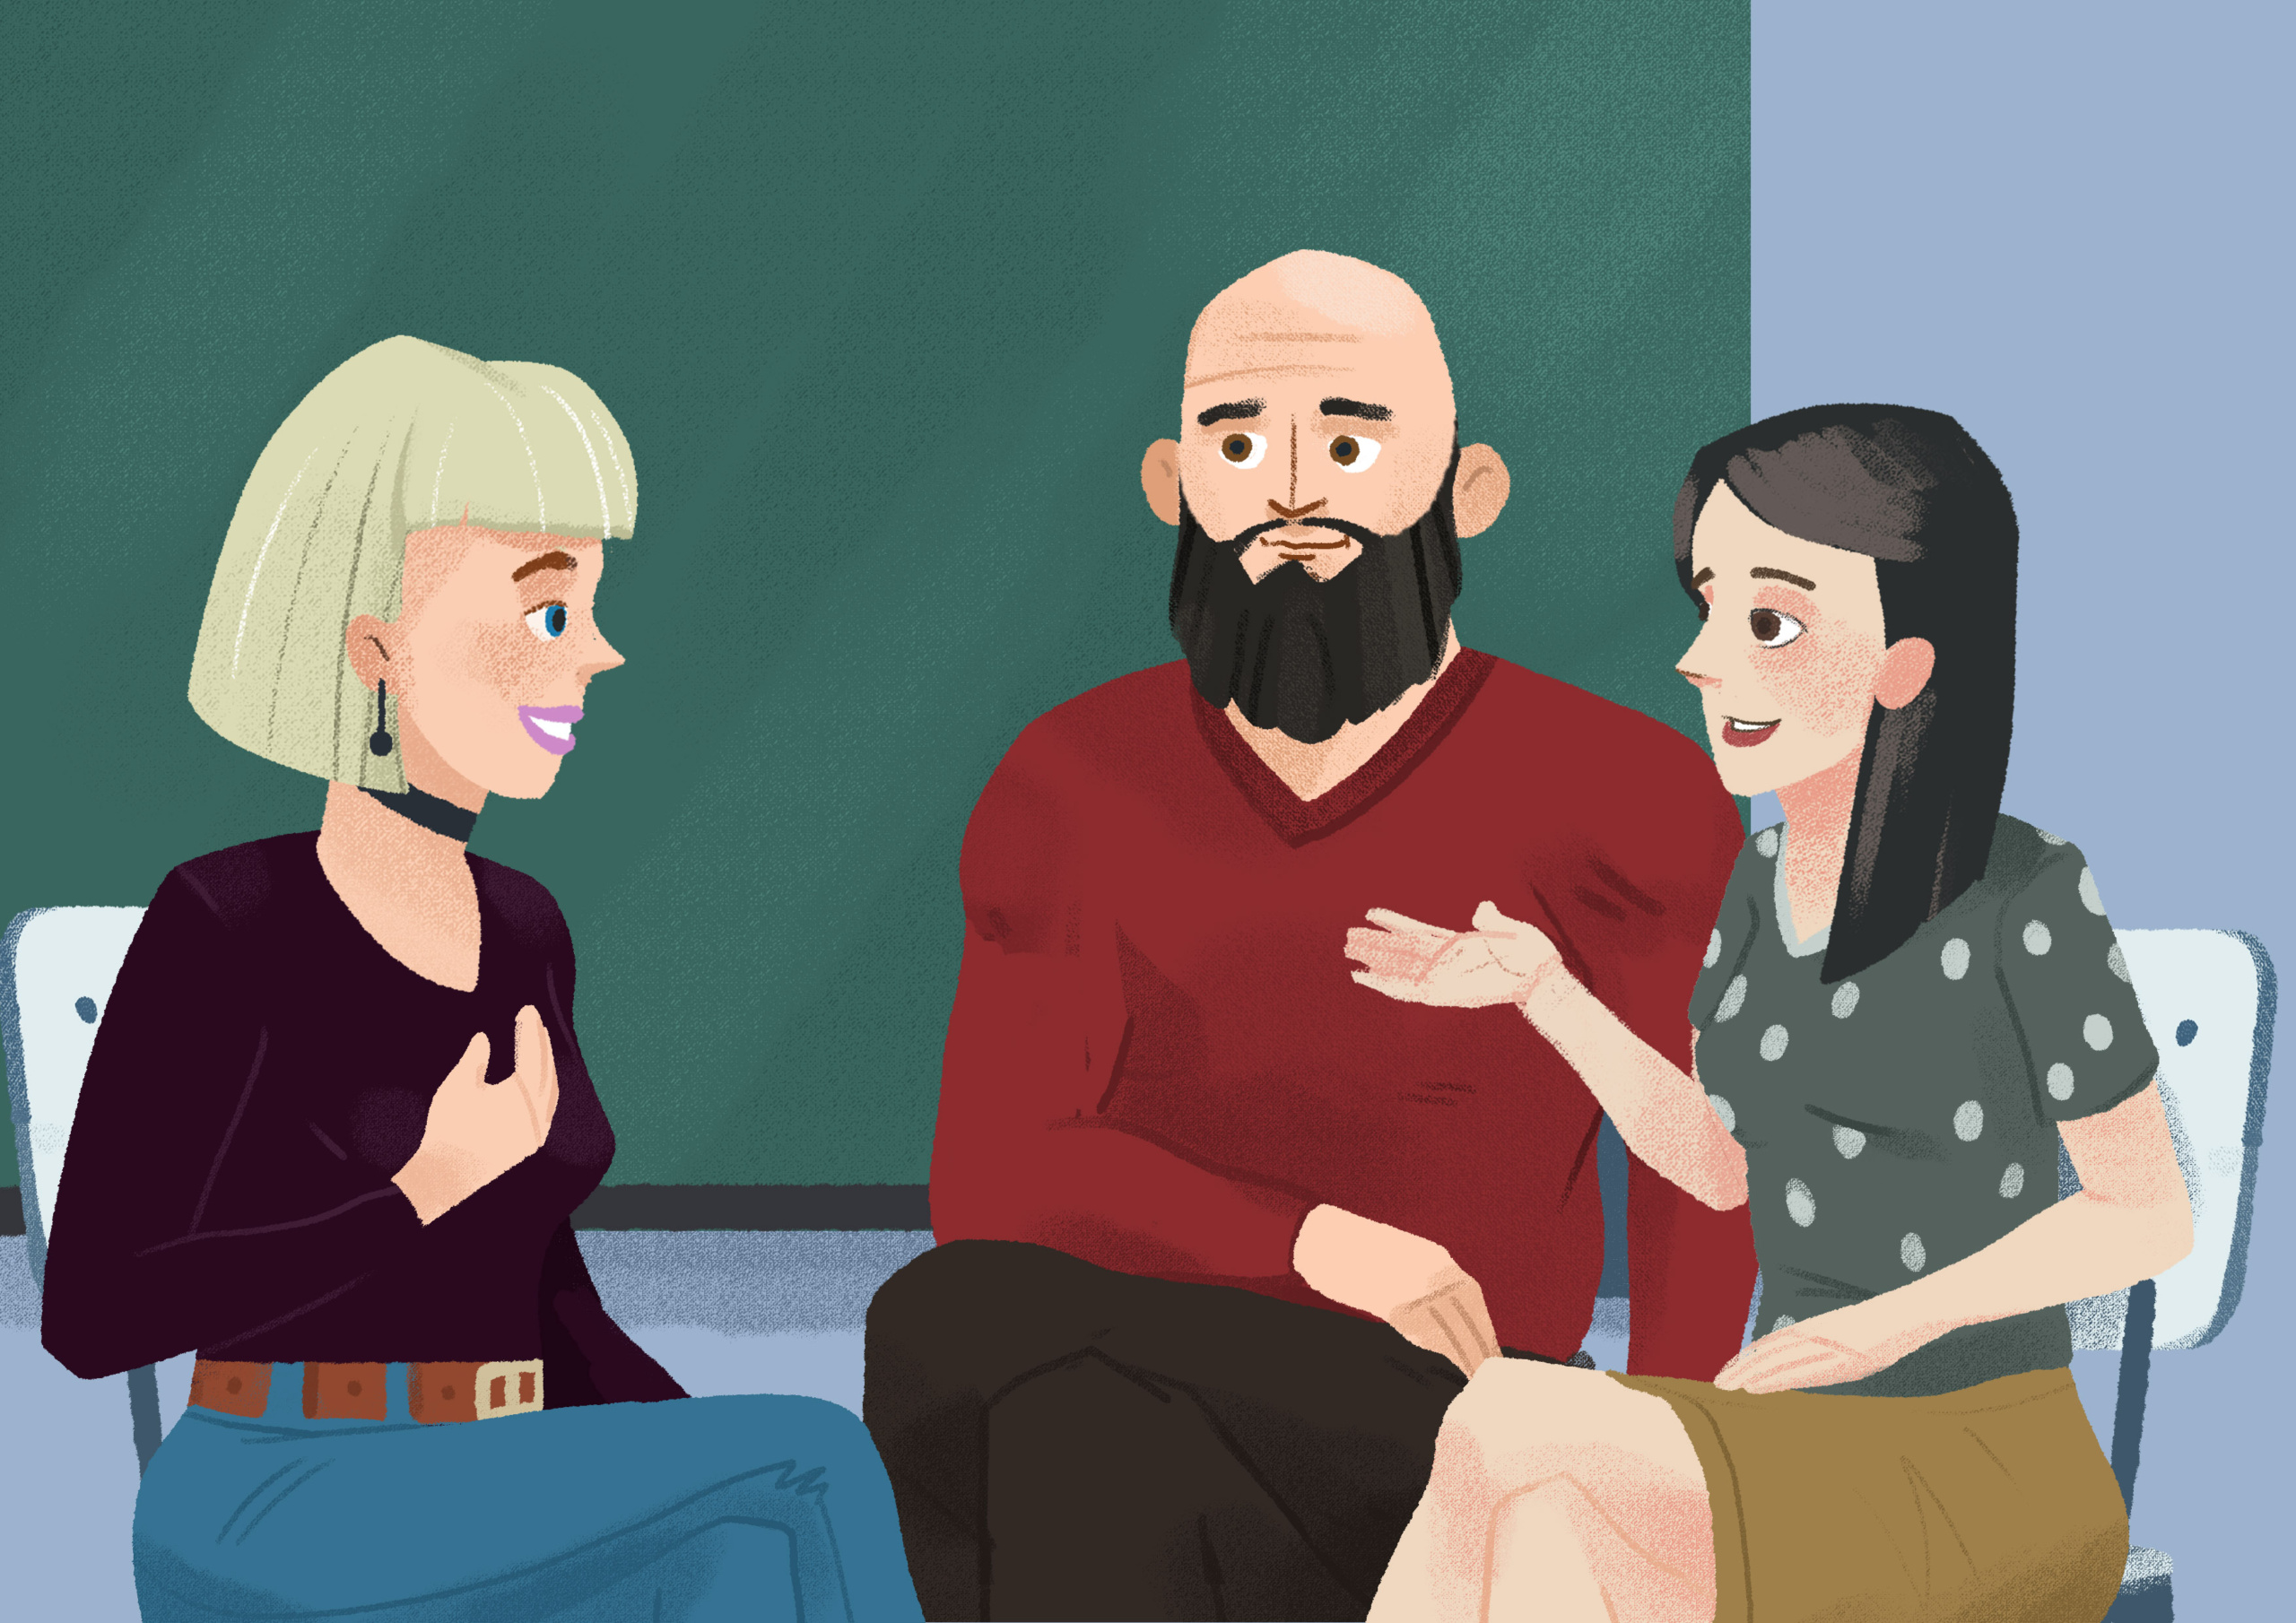 Two female students and a male student with name tag stickers on their chests reading Laura, Davor, and Sandra sitting in front of a green blackboard. The two females students are having a discussion while the male student is listening.